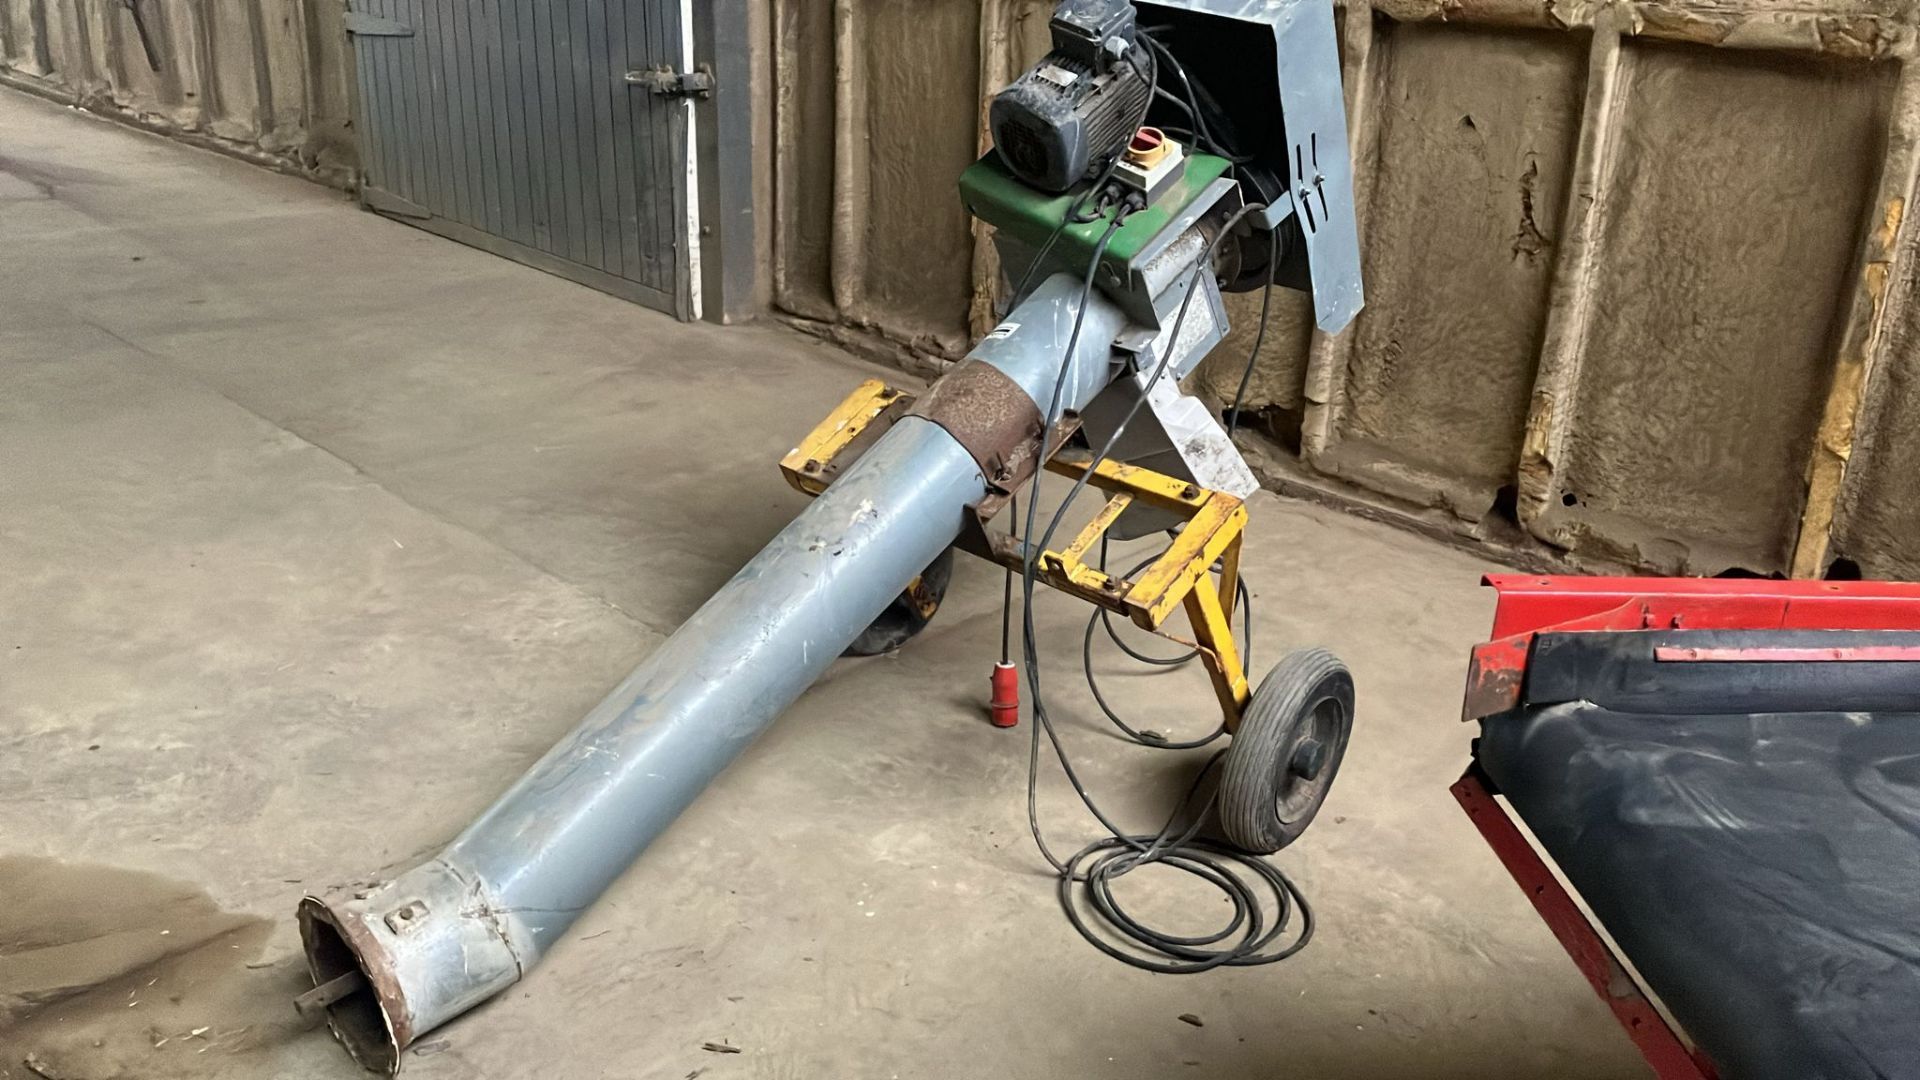 Sukup short auger for sweep auger, passed PAT test